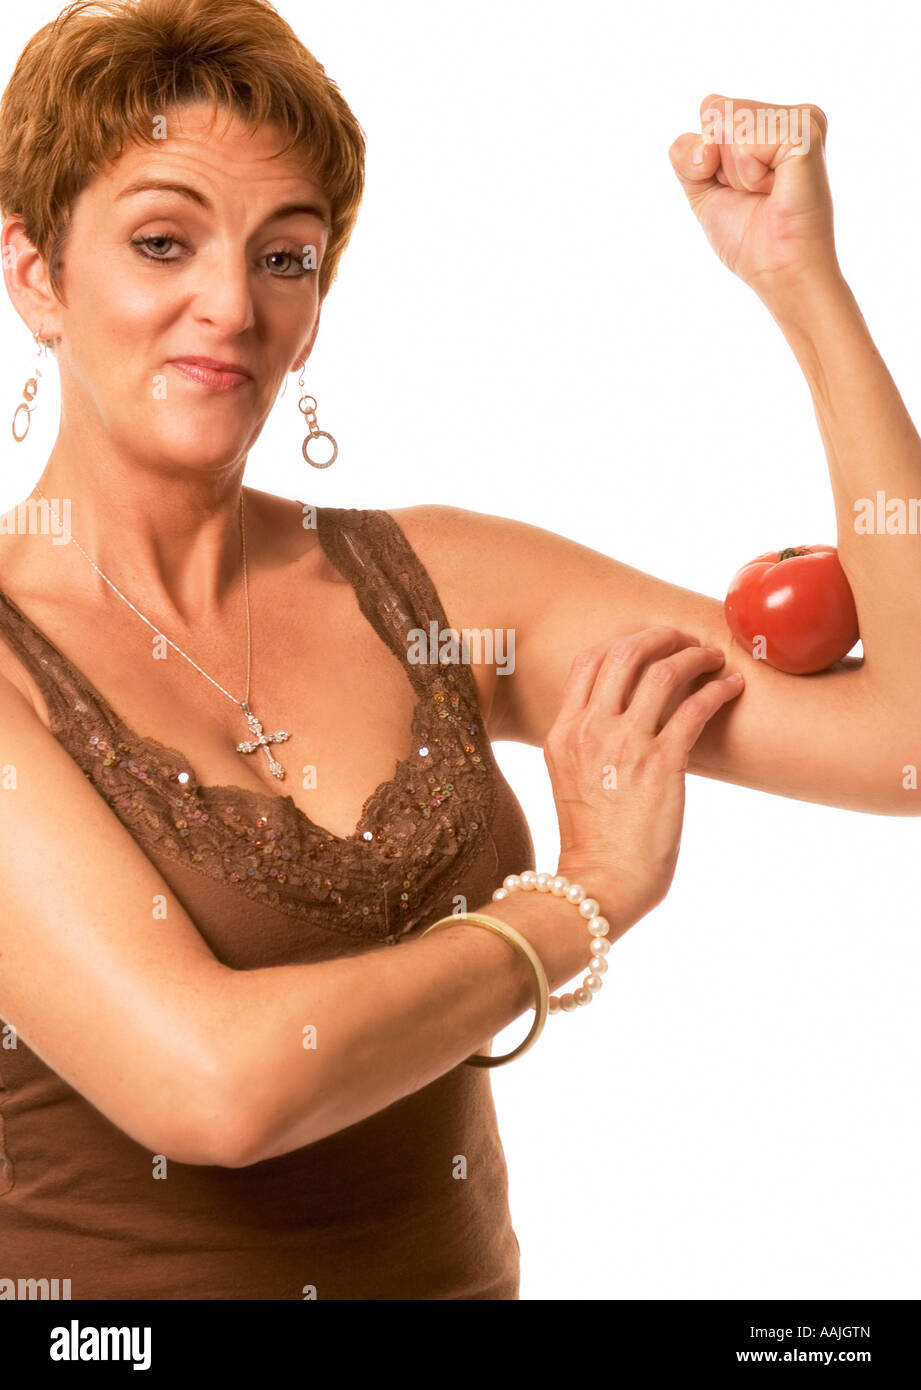 Closeup of Middle Aged Caucasian Woman (35-40) with Tomato Squeezed in Arm Muscle, Strength and Healthy Lifestyle Stock Photo